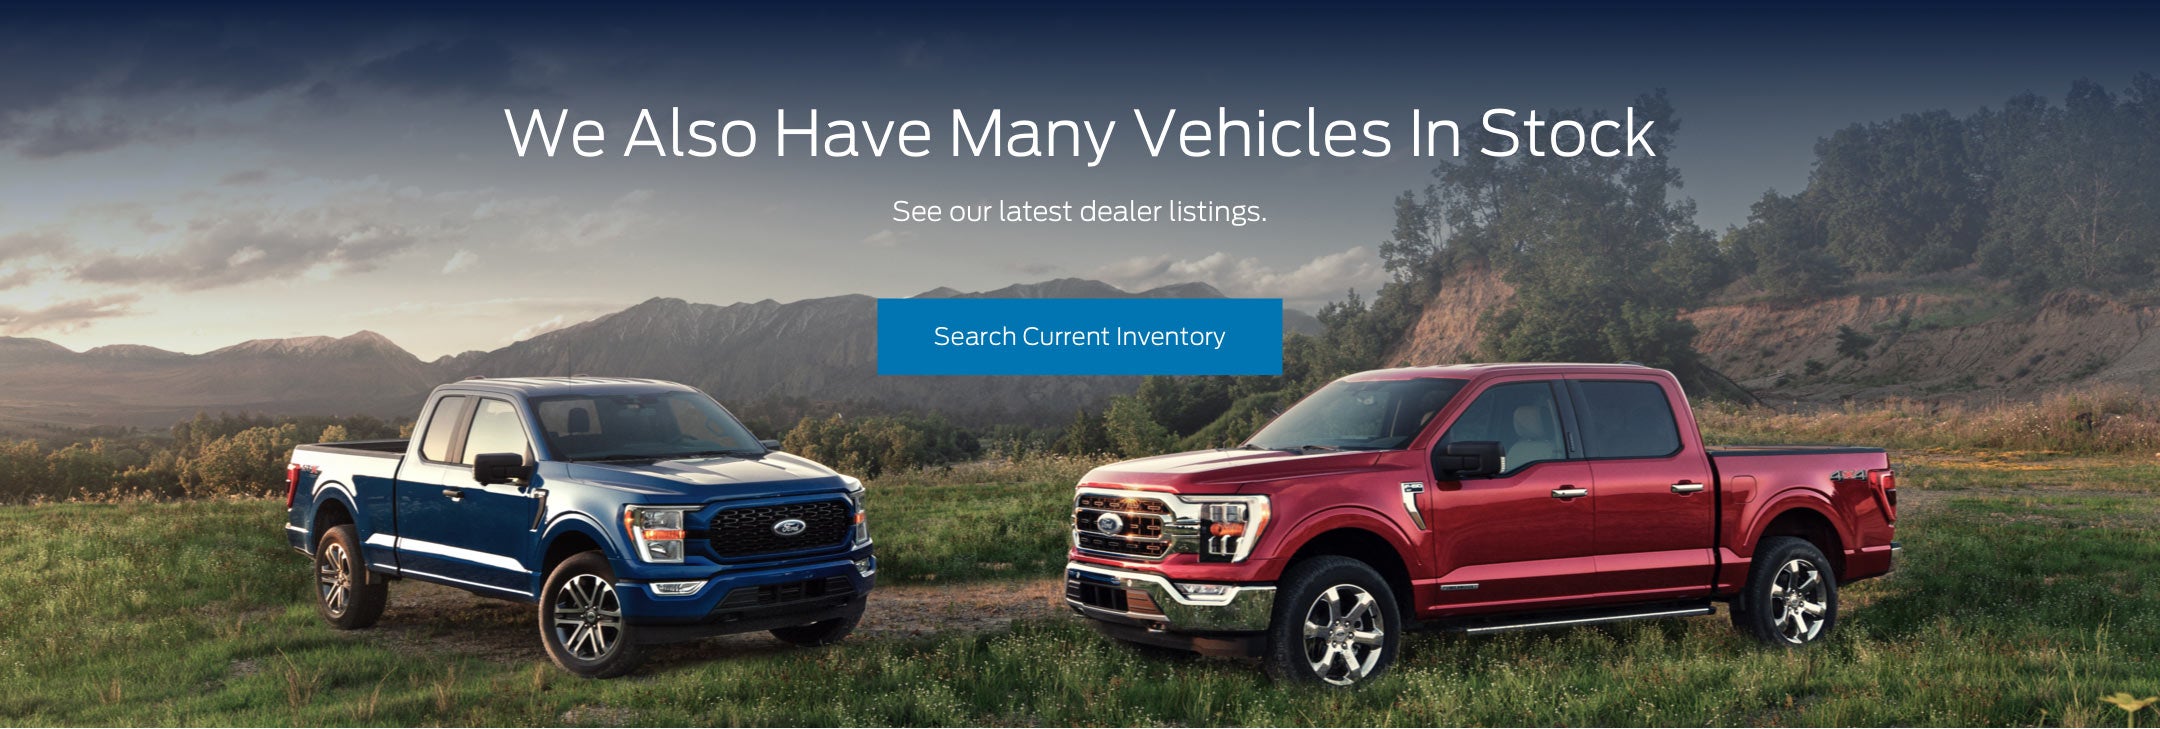 Ford vehicles in stock | Homan Ford in Ripon WI